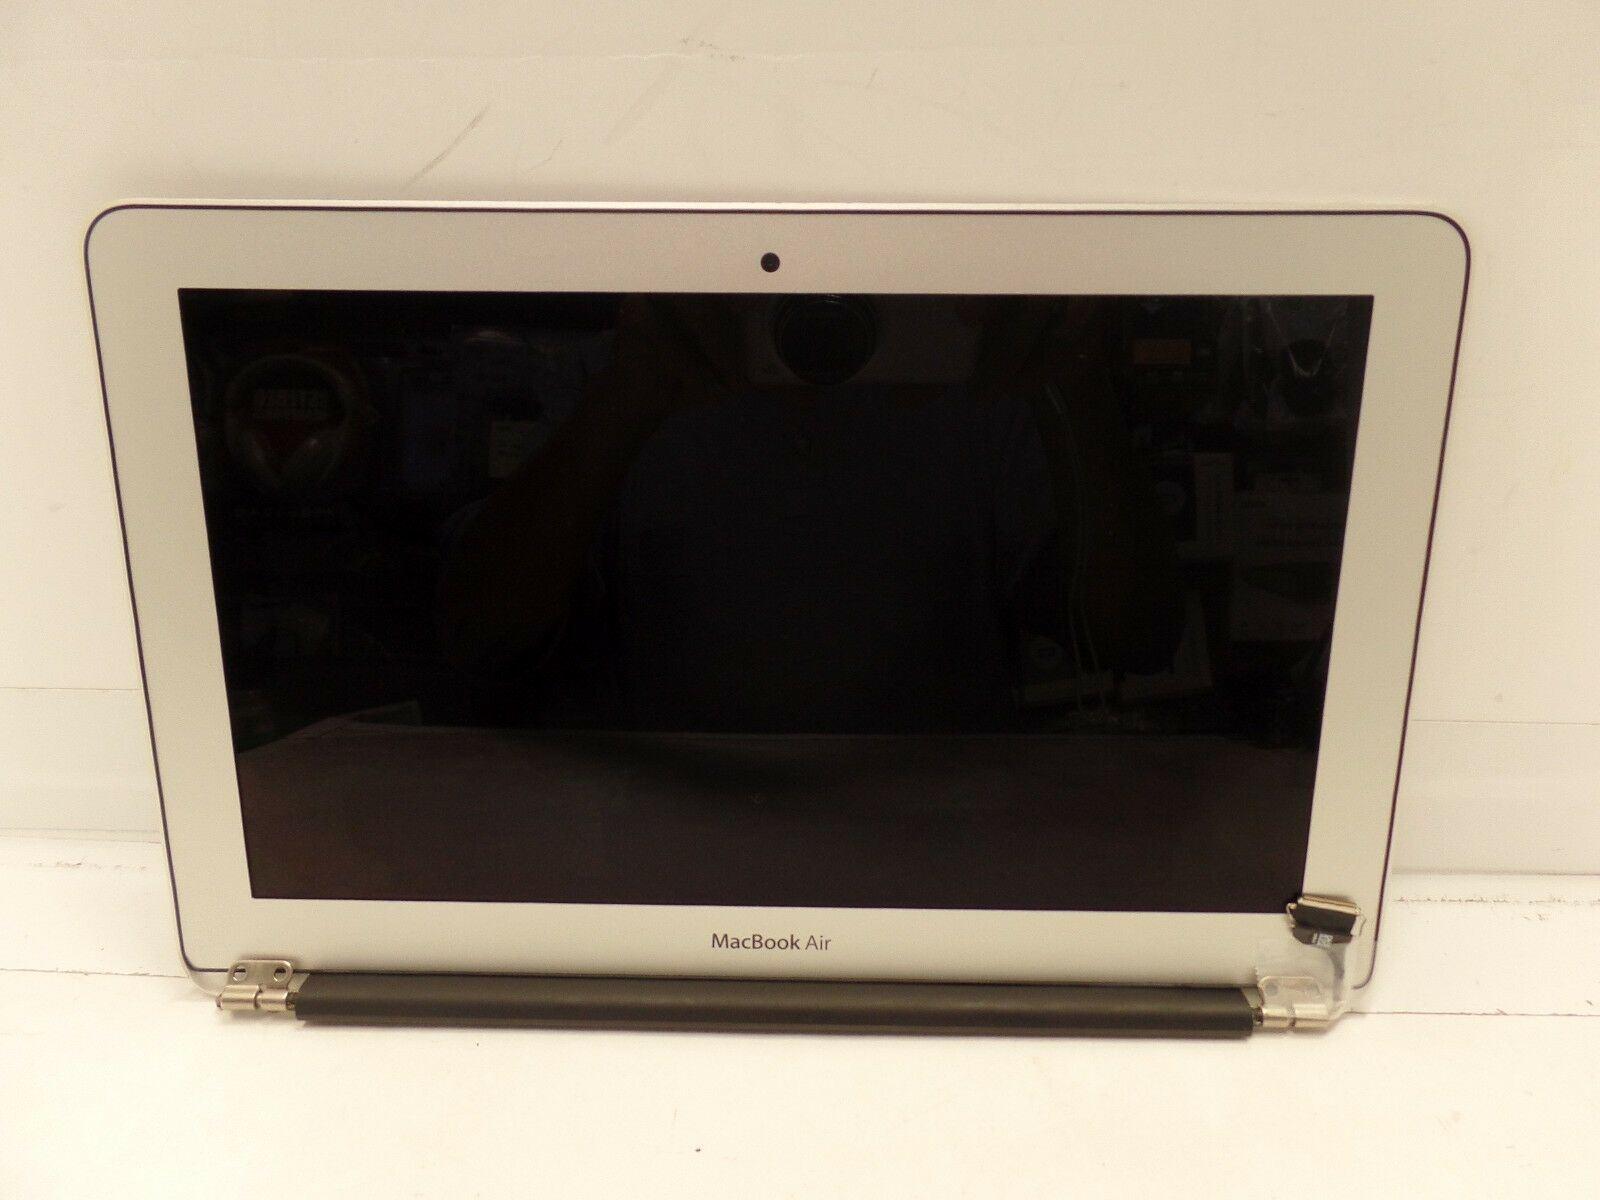 MD223LL A MD224LL 661 5737 661 6069 661 6624 lcd display clamshell 11 inch glossy macbook air 11 mid 2012